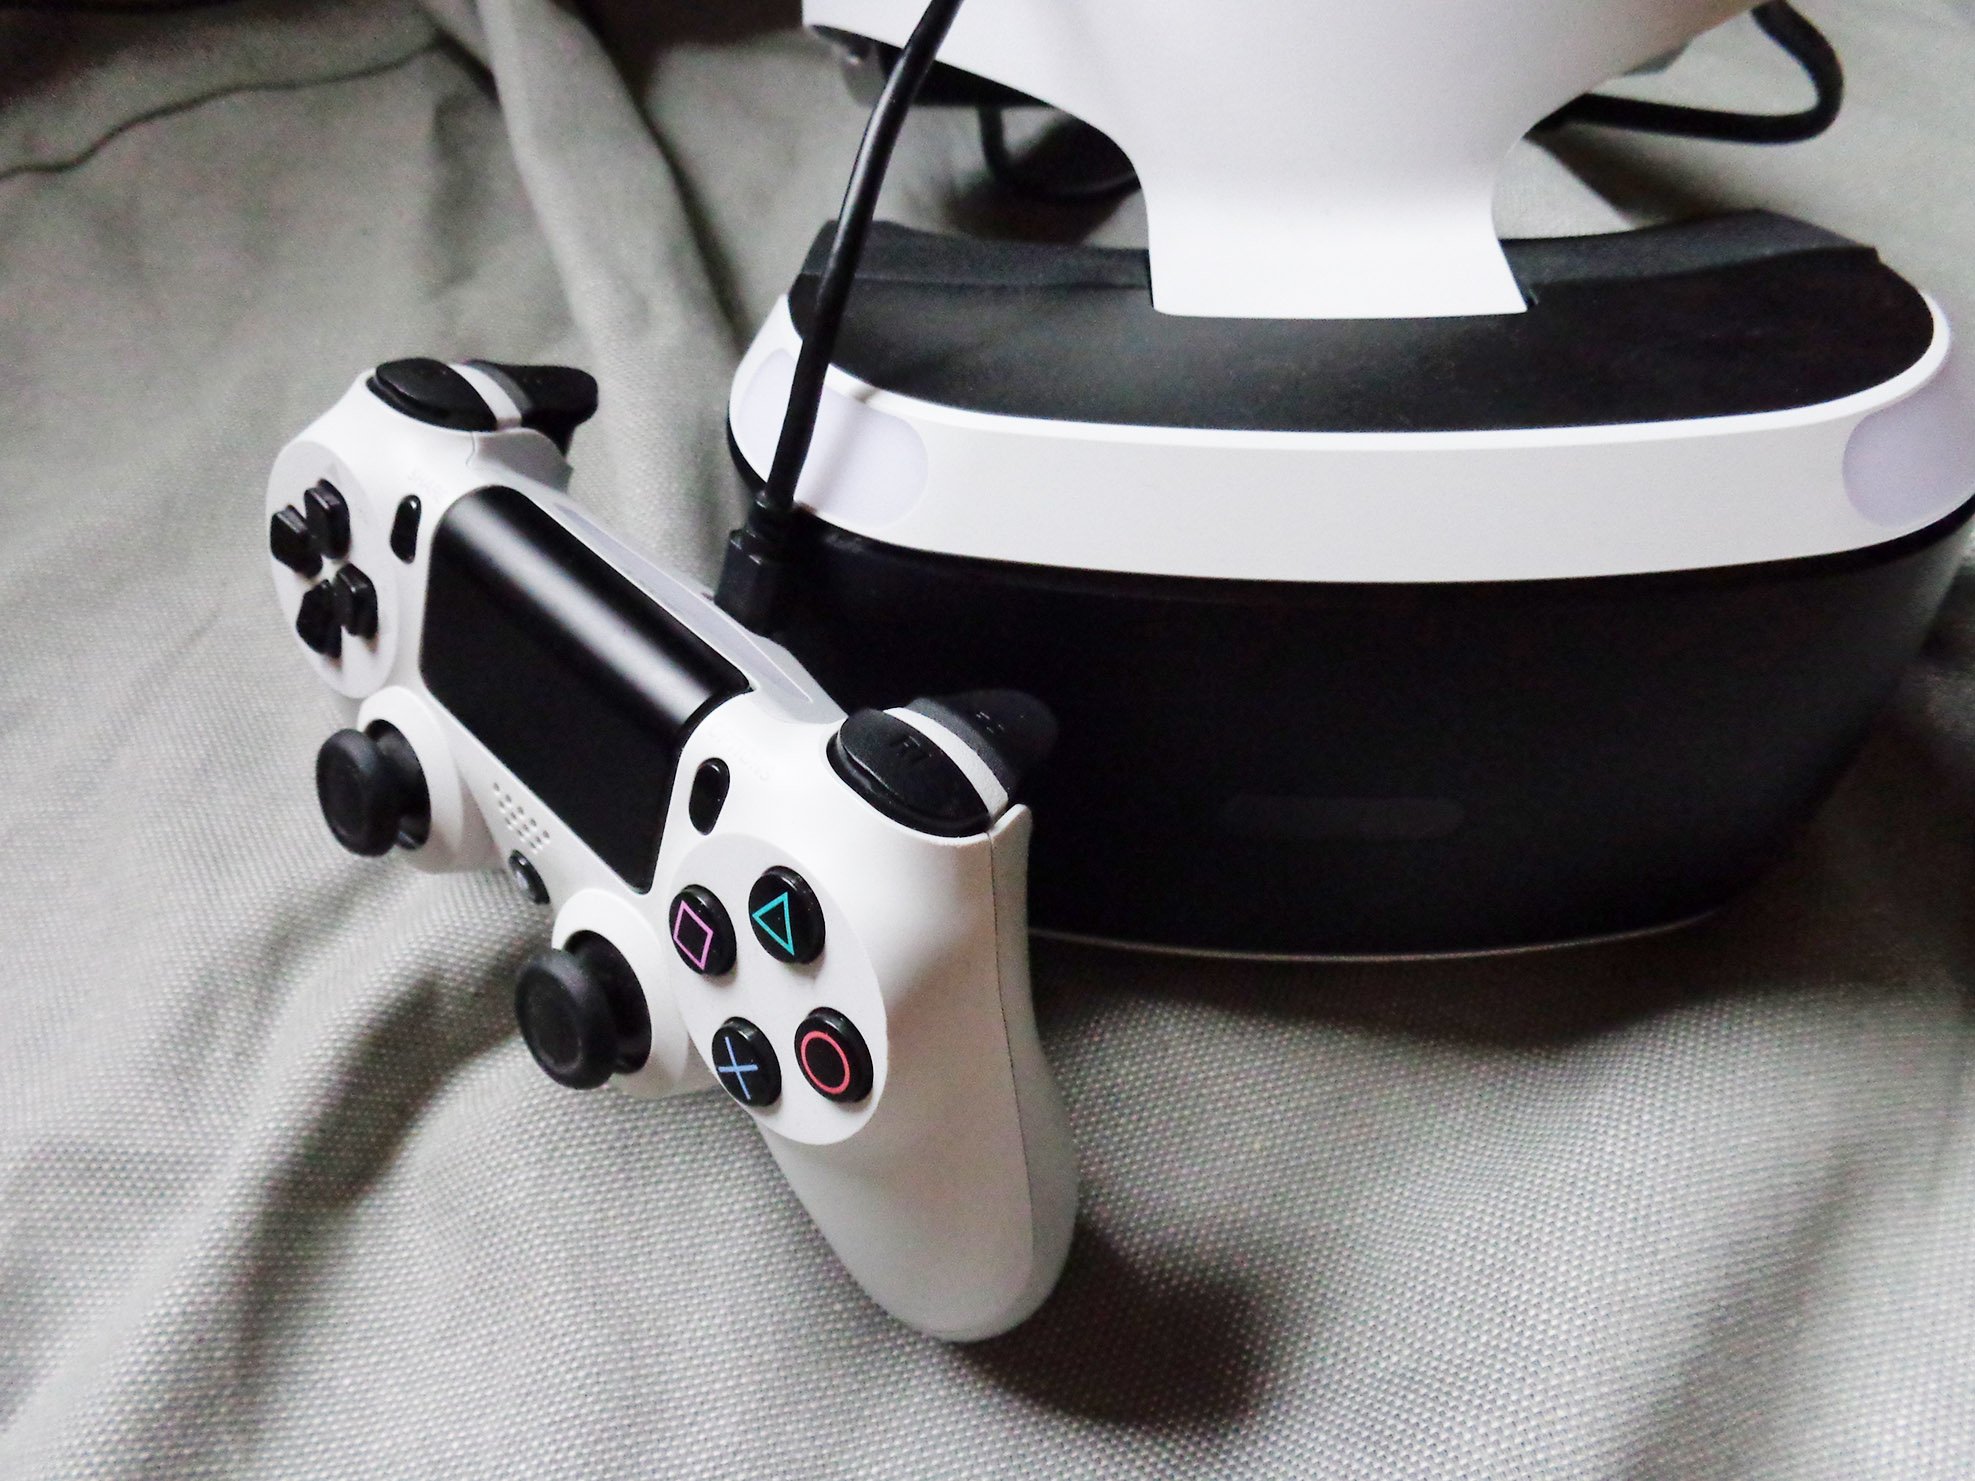 VR controller 2022 | Android Central